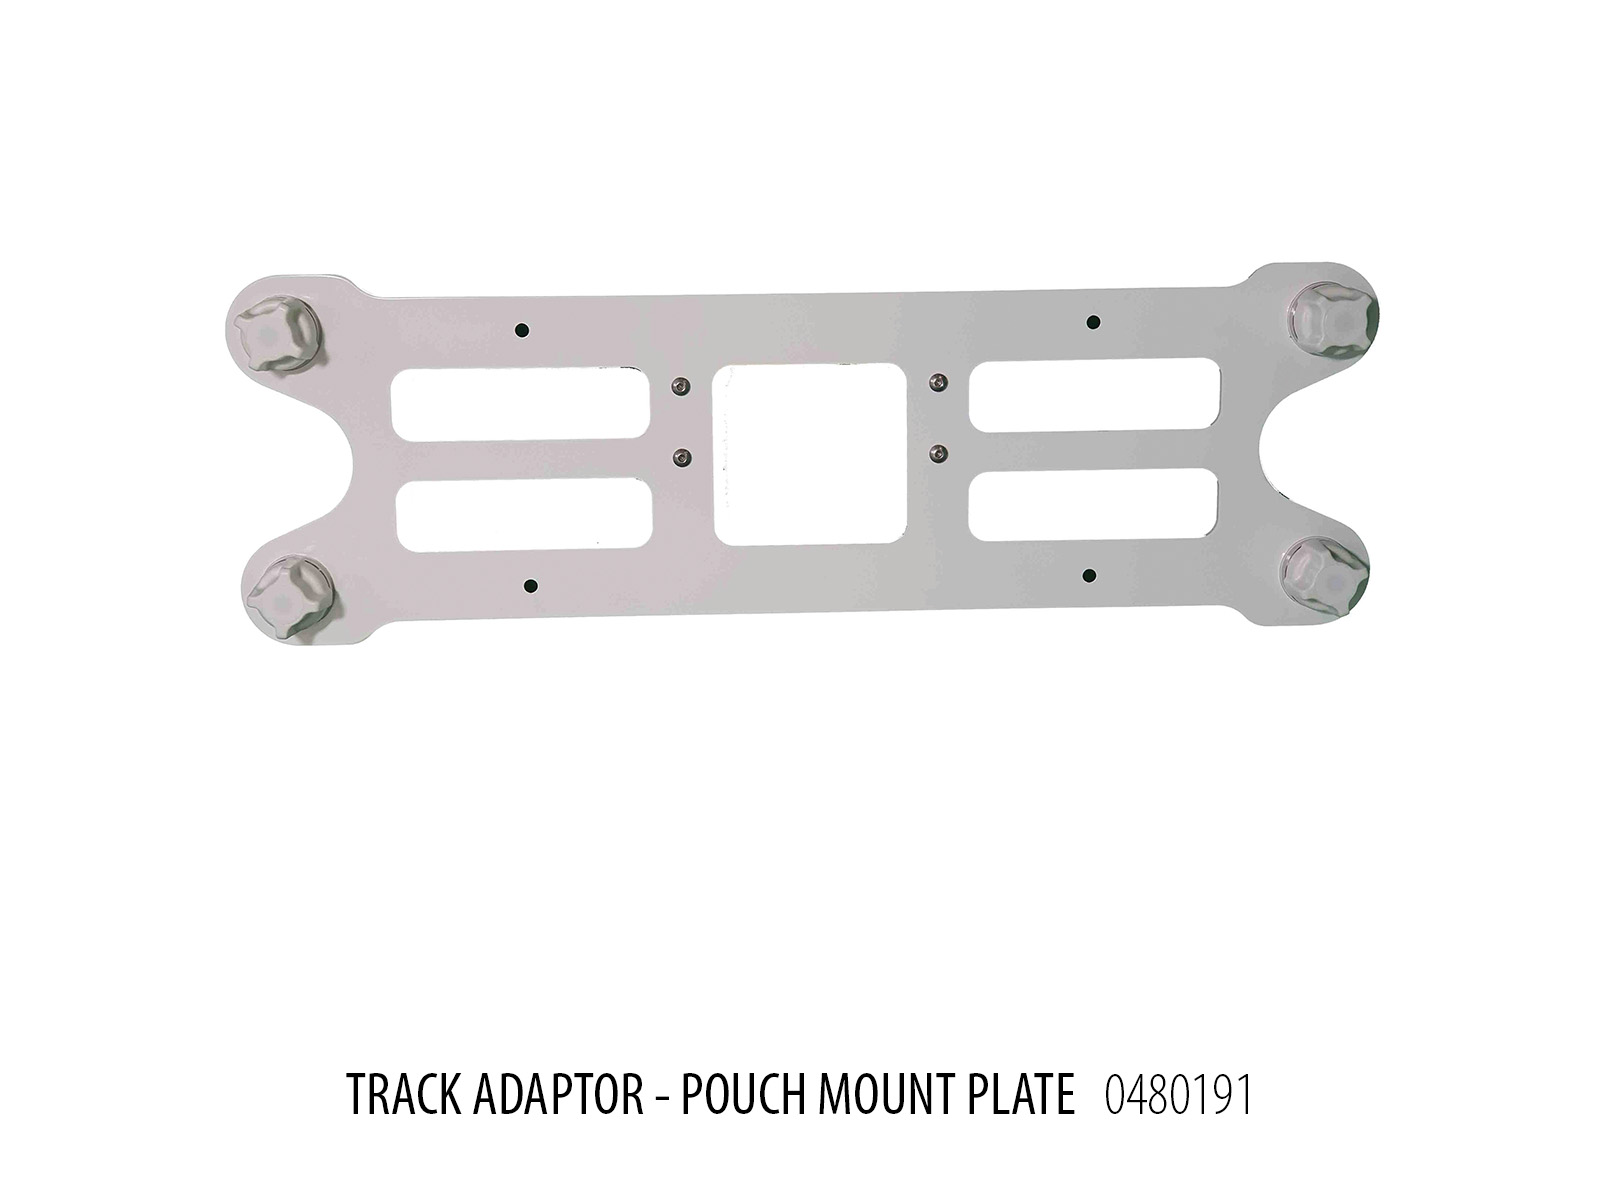 Pouch Mount Plate Track Adaptor